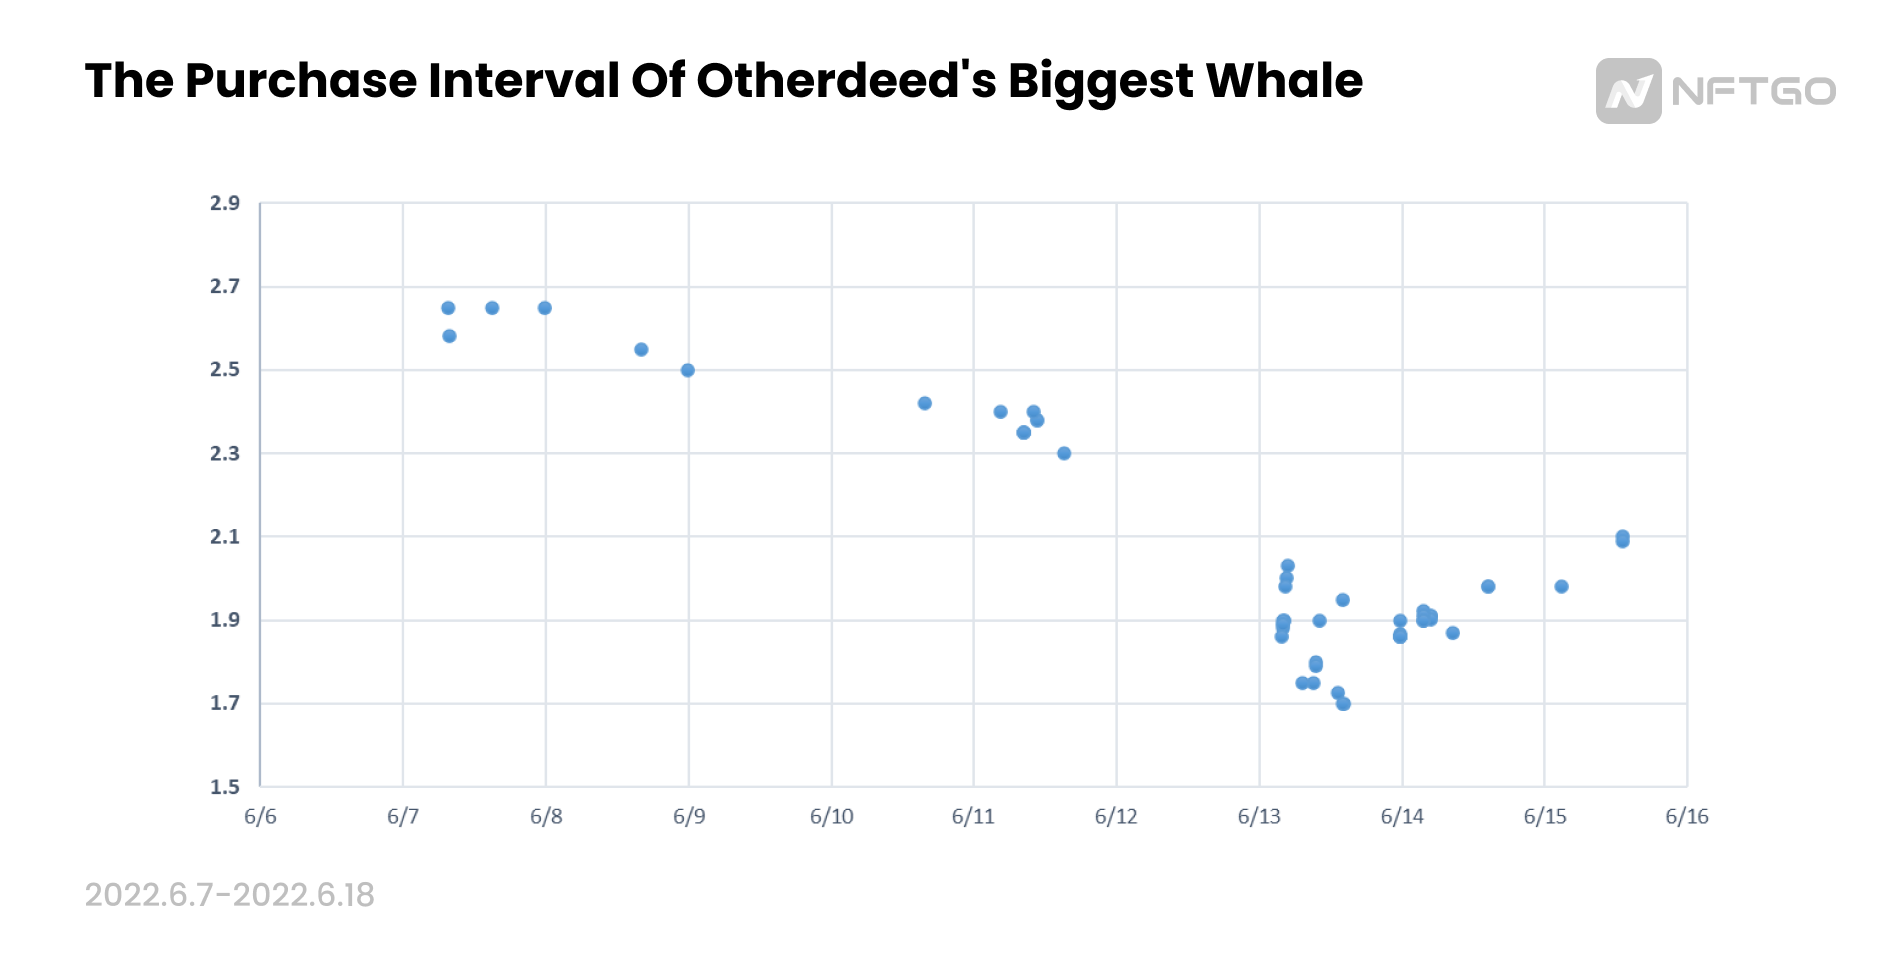 The Purchase Interval of Otherdeed's Biggest Whale (Source: NFTGo.io)